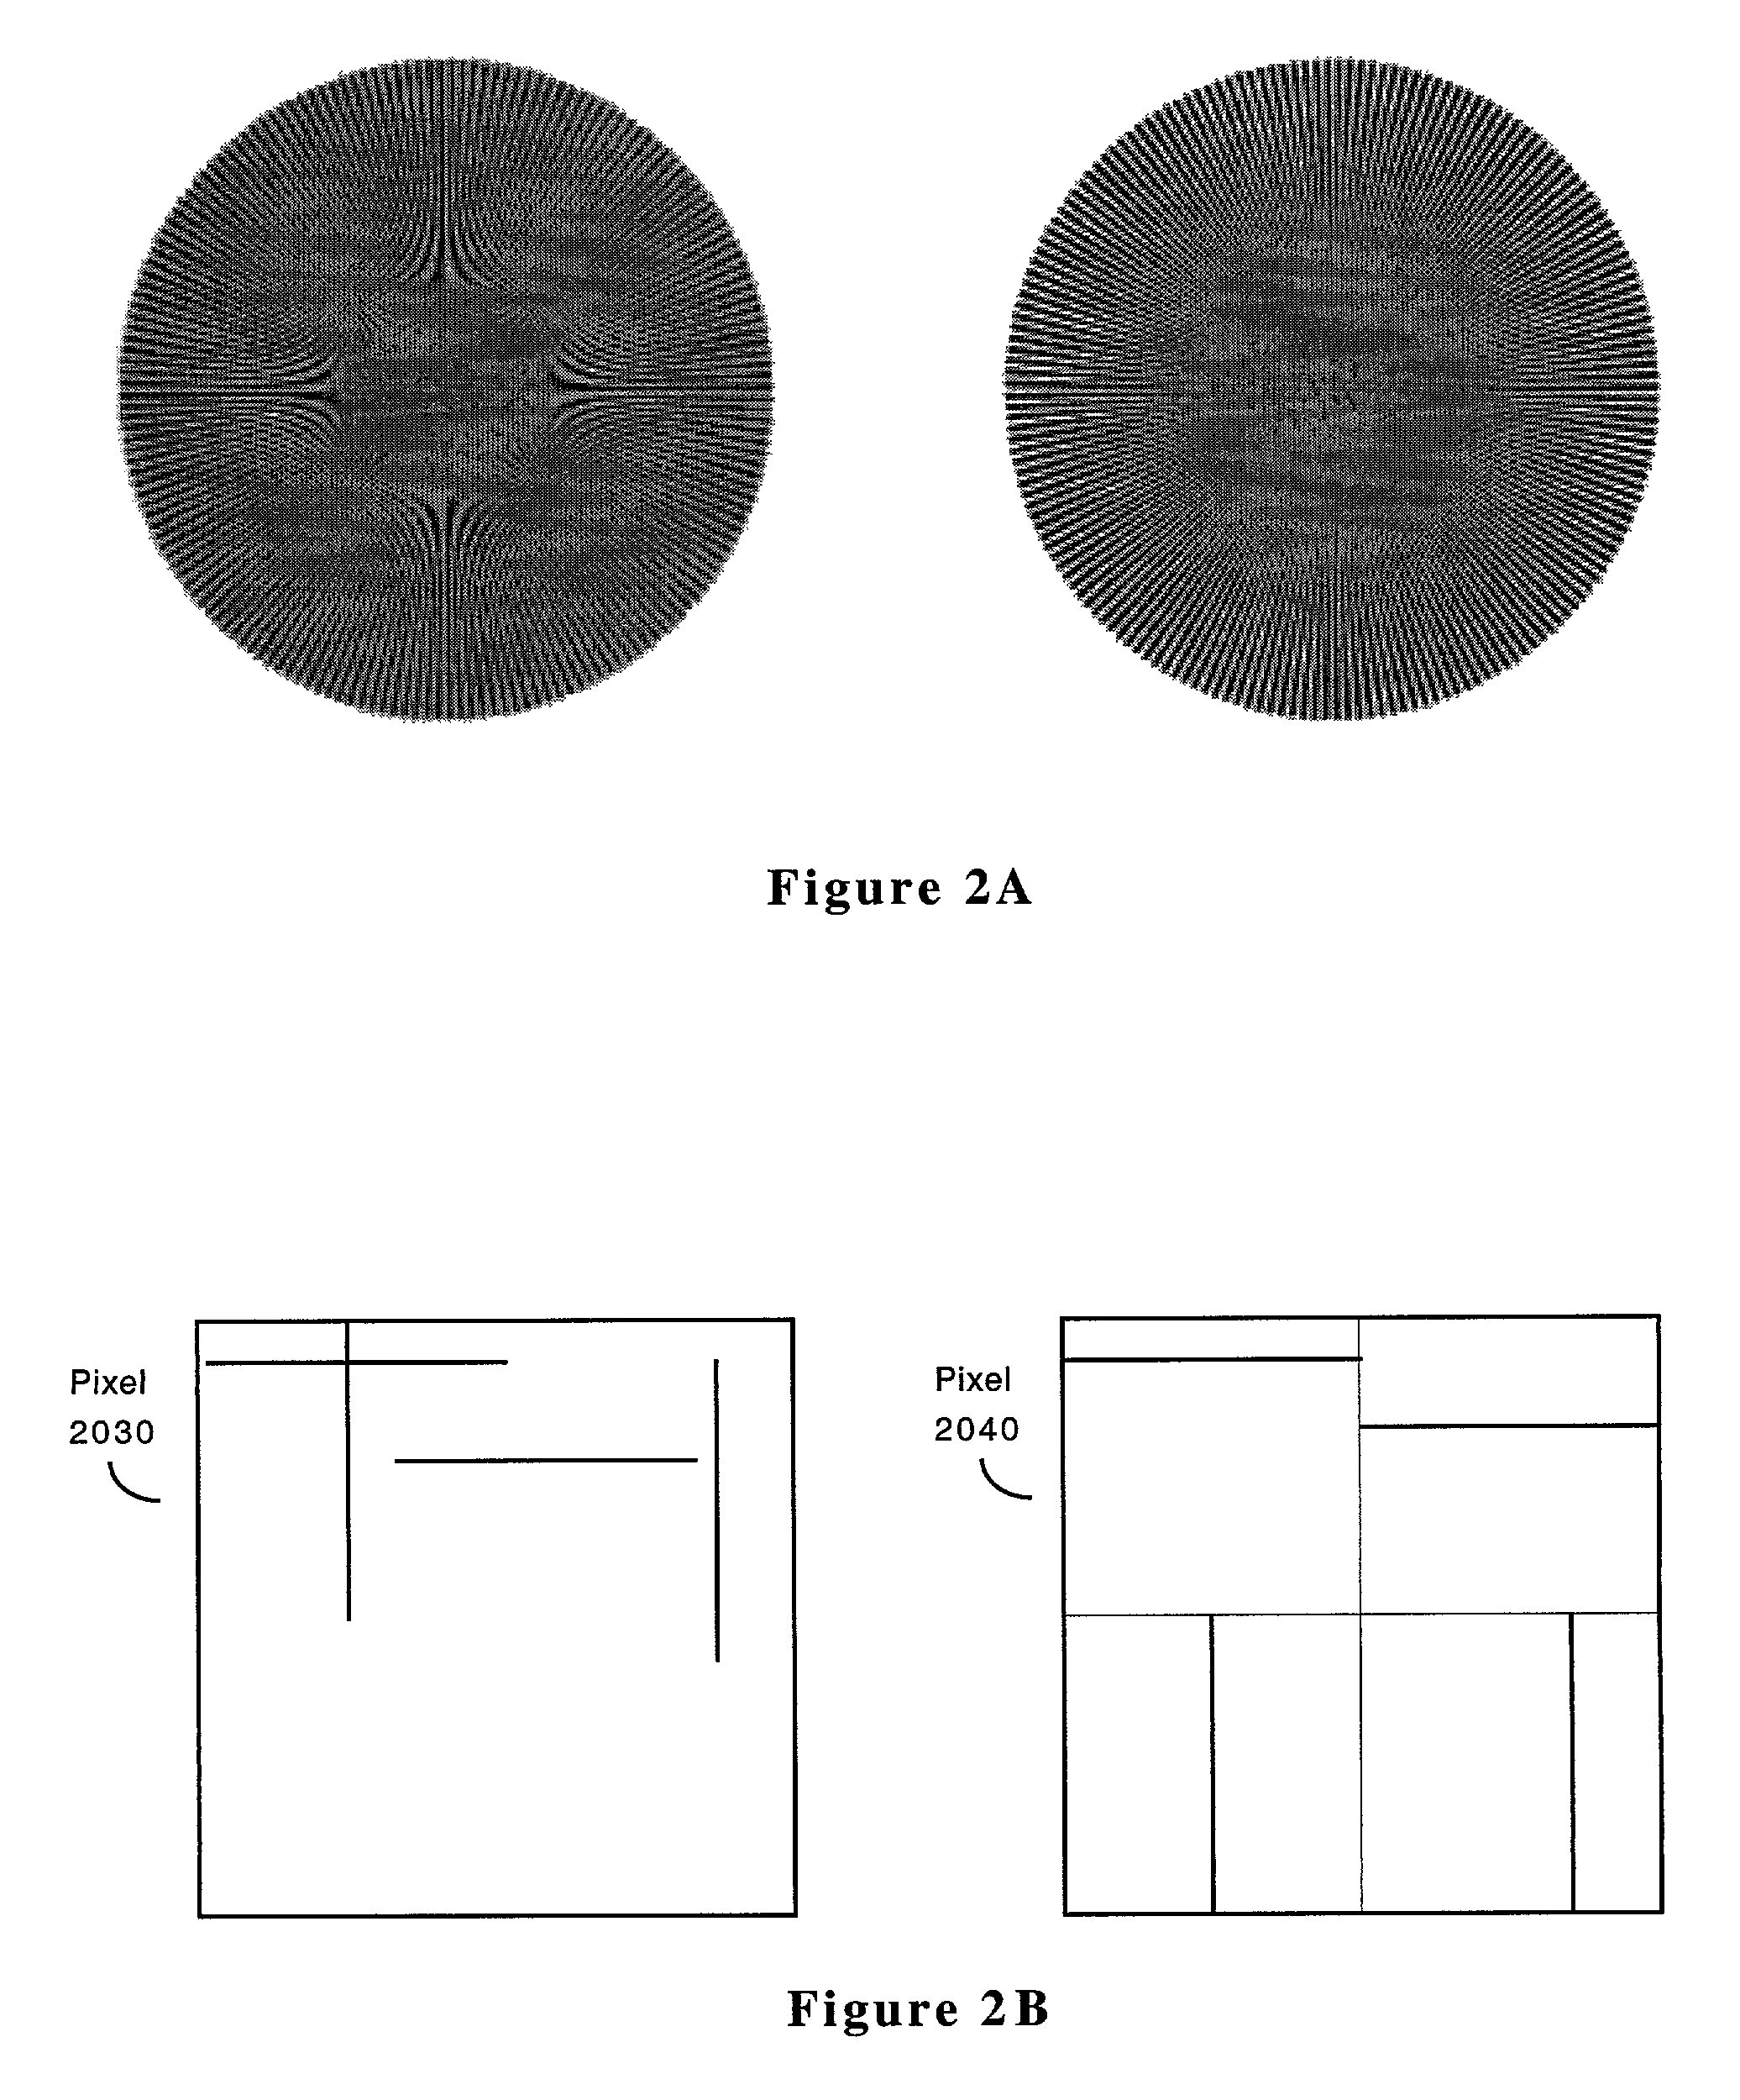 System and method related to data structures in the context of a computer graphics system